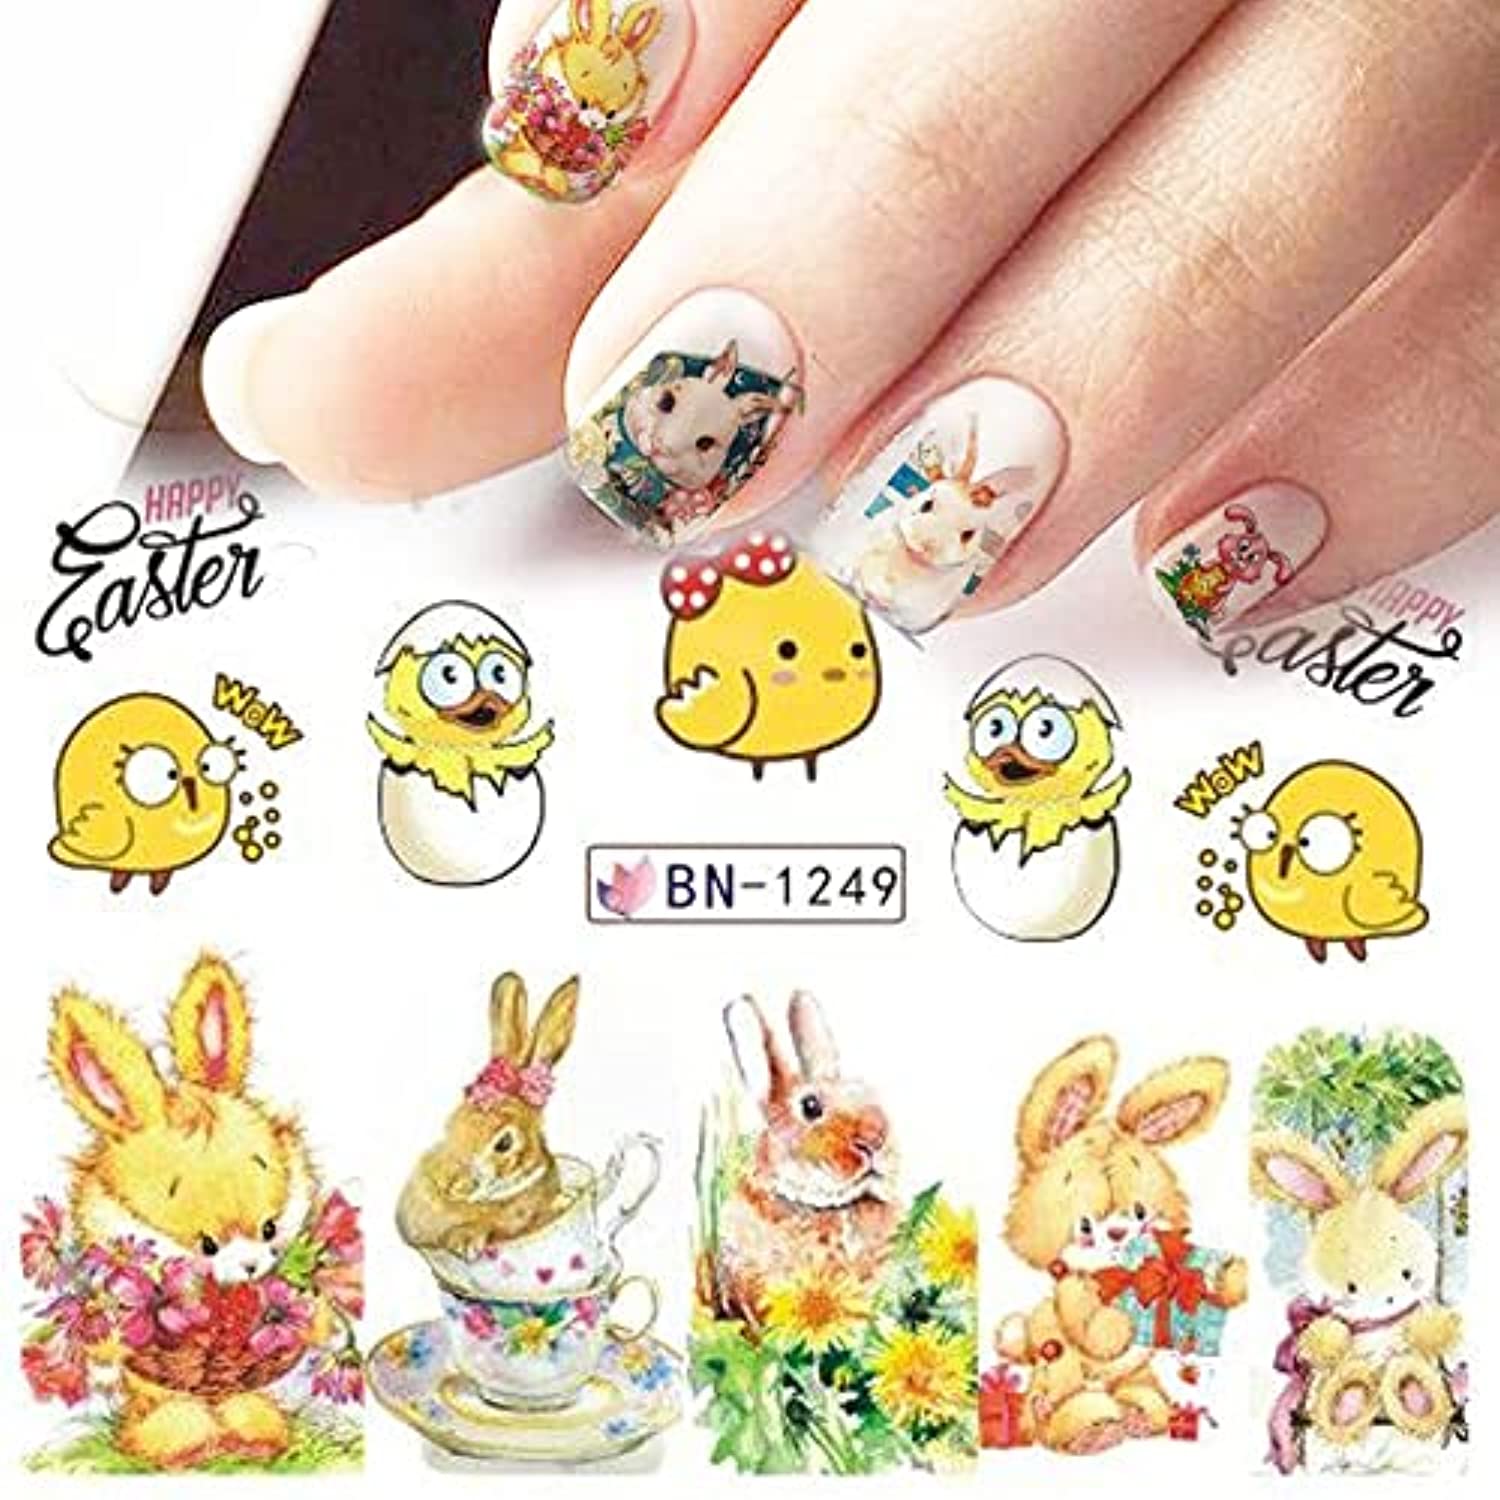 12 Sheet Easter Nail Art Stickers Bunny Eggs Nail Decal Nail Art Supplies Bunny Eggs Chick Rabbits Flower Nail Design Jesus Christ Easter Nail Decoration for Women Girls Manicure Decor